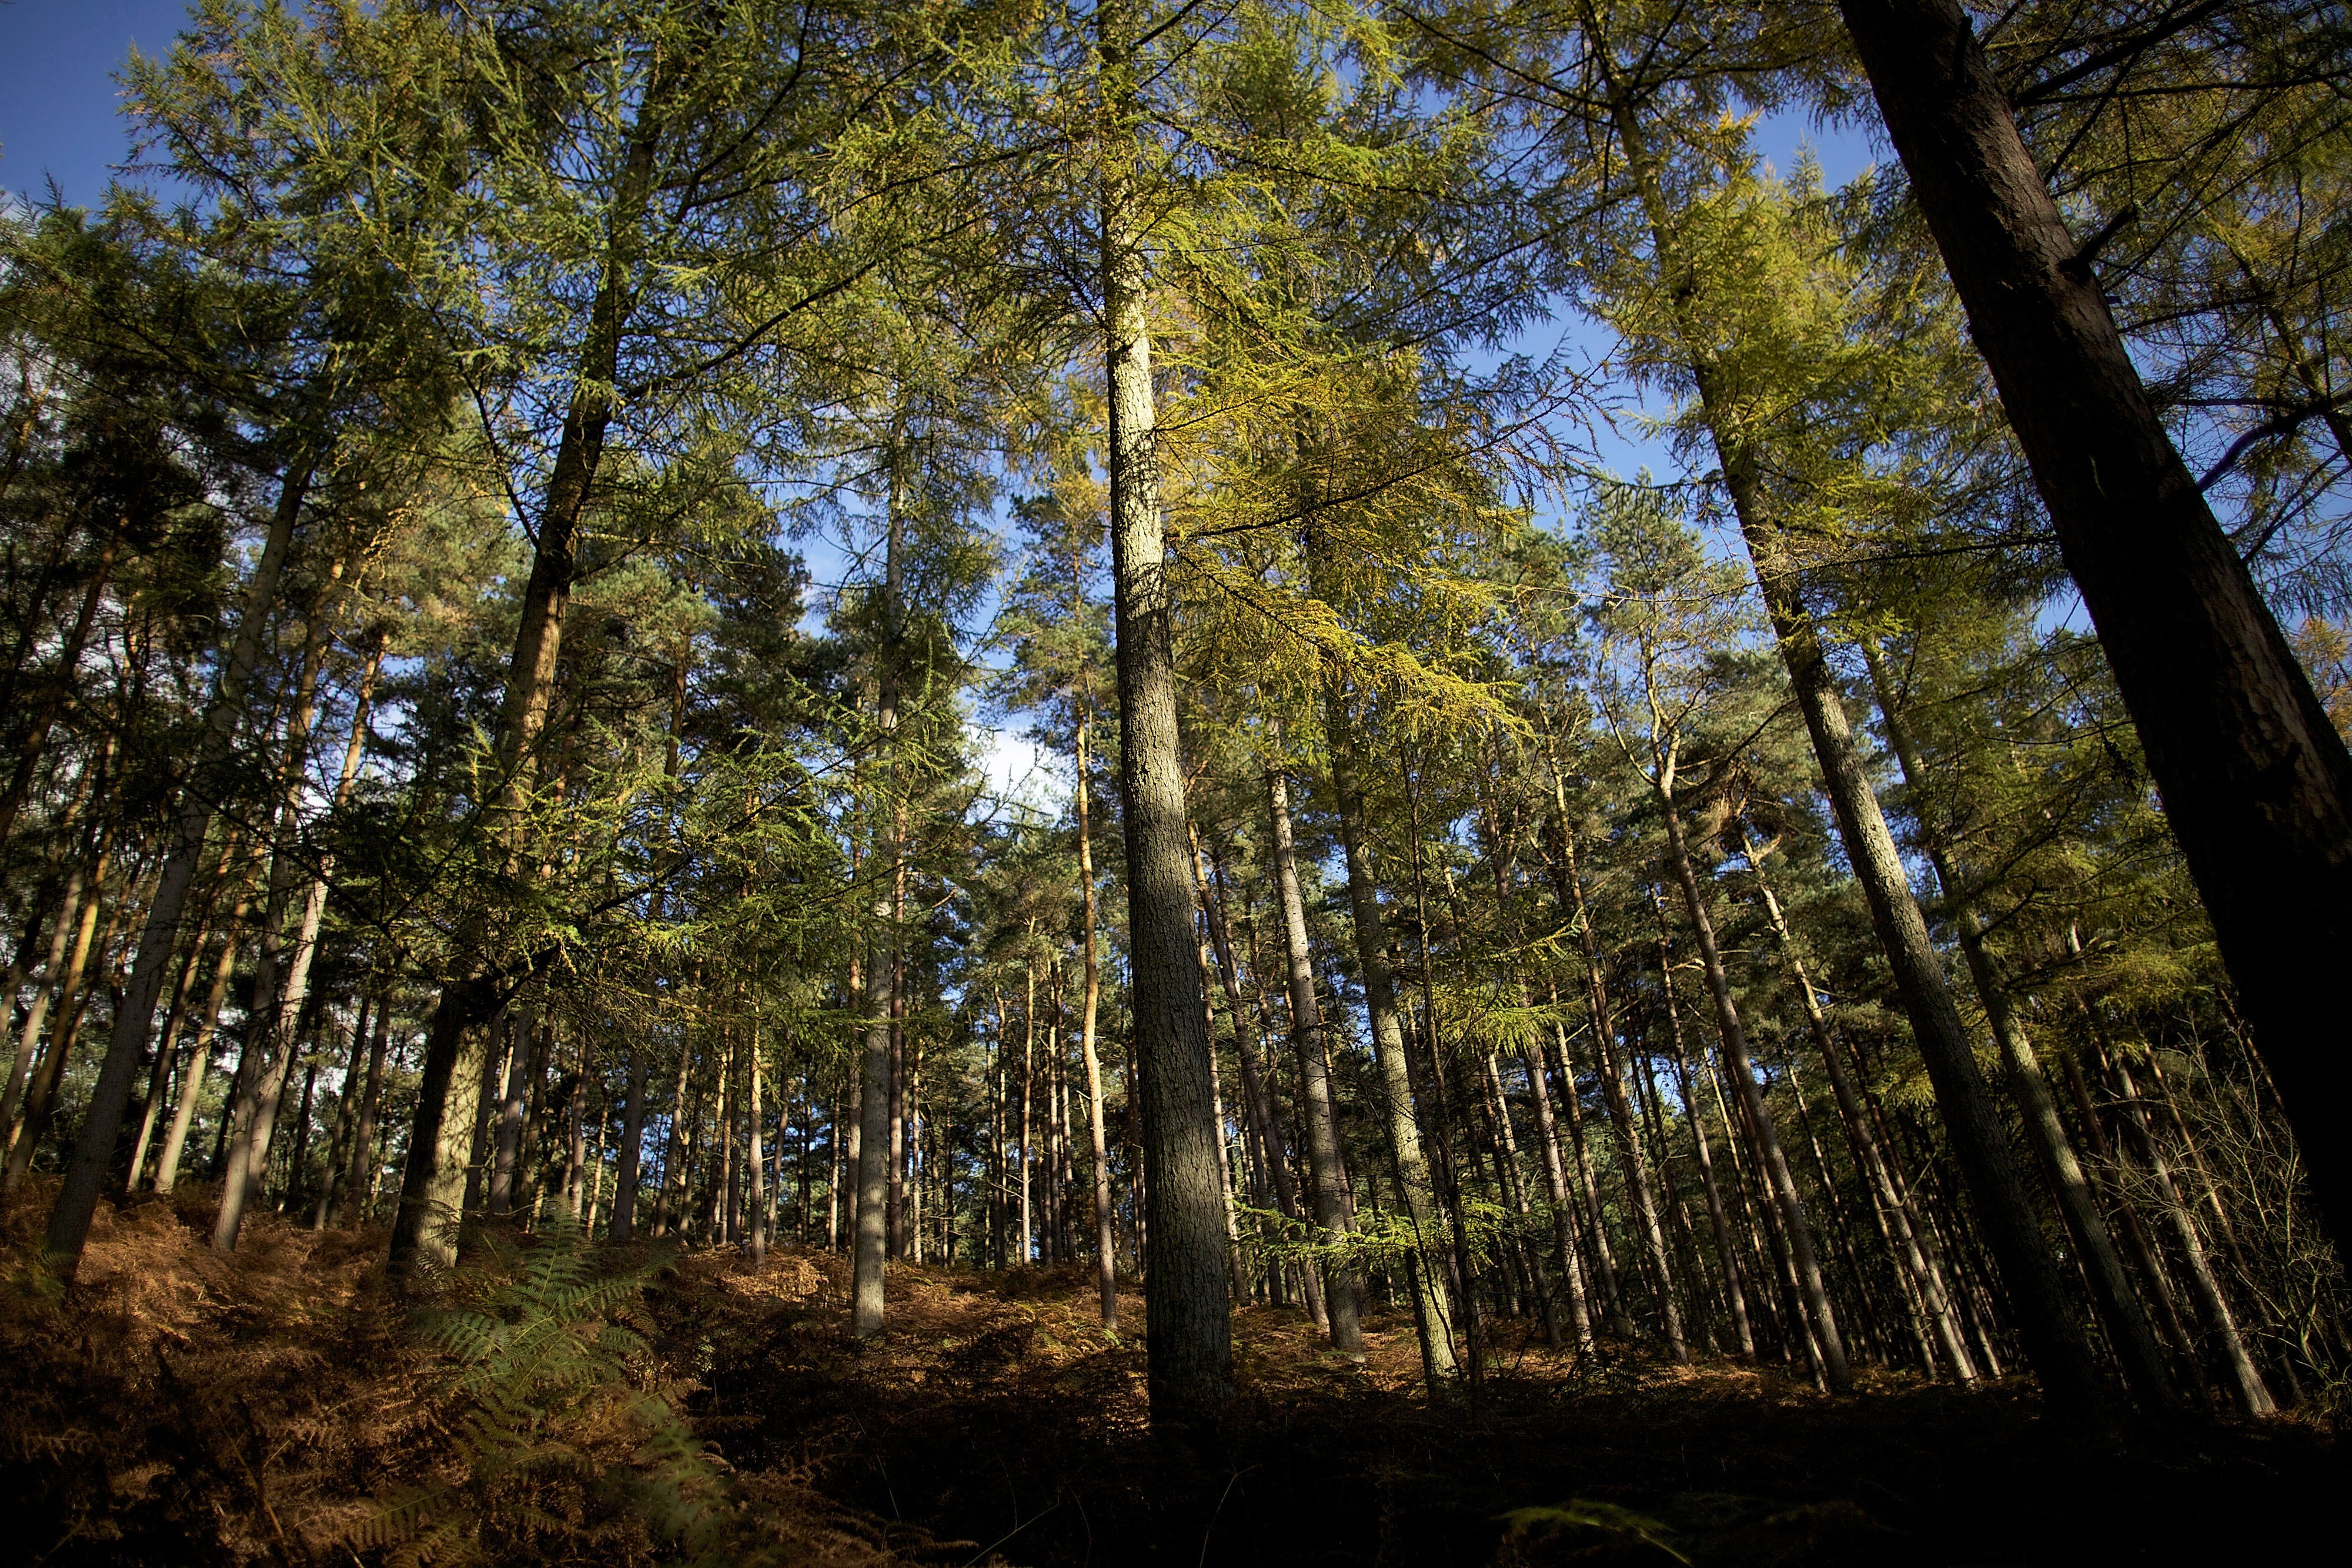 Trees have been deliberately poisoned in Dorset (file photo)